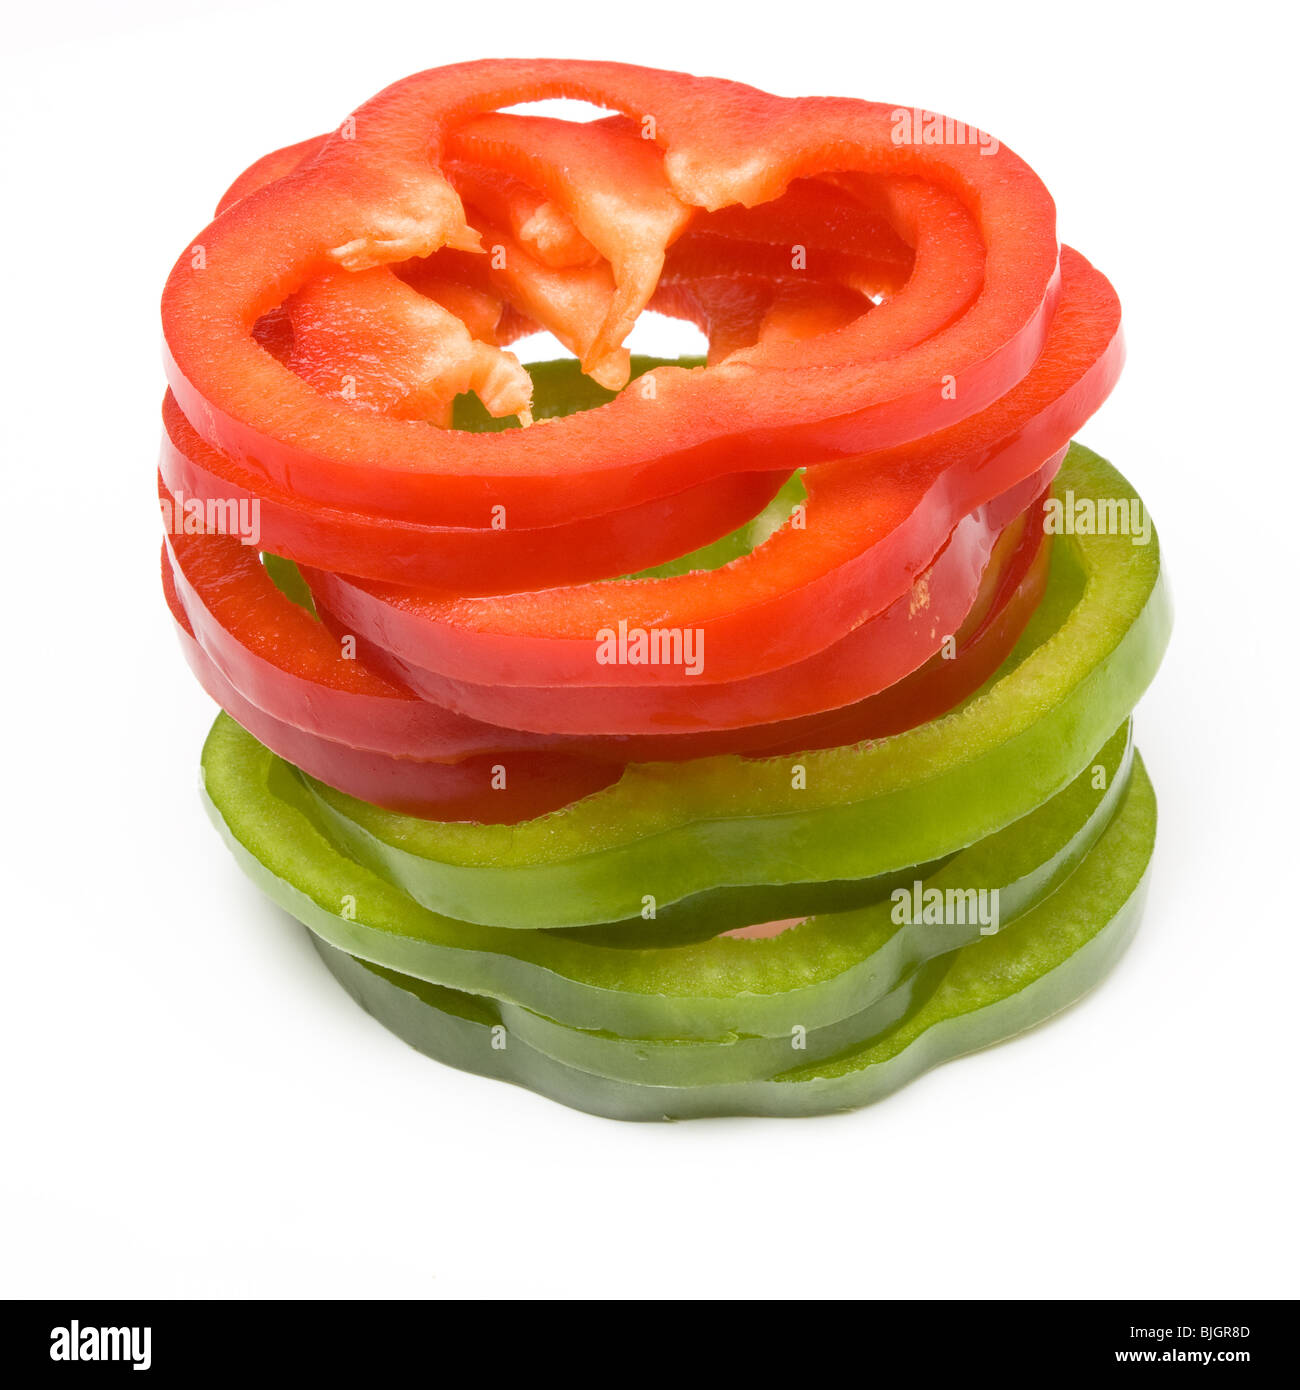 Stack of Sliced Red and Green Peppers arranged on white background. Stock Photo